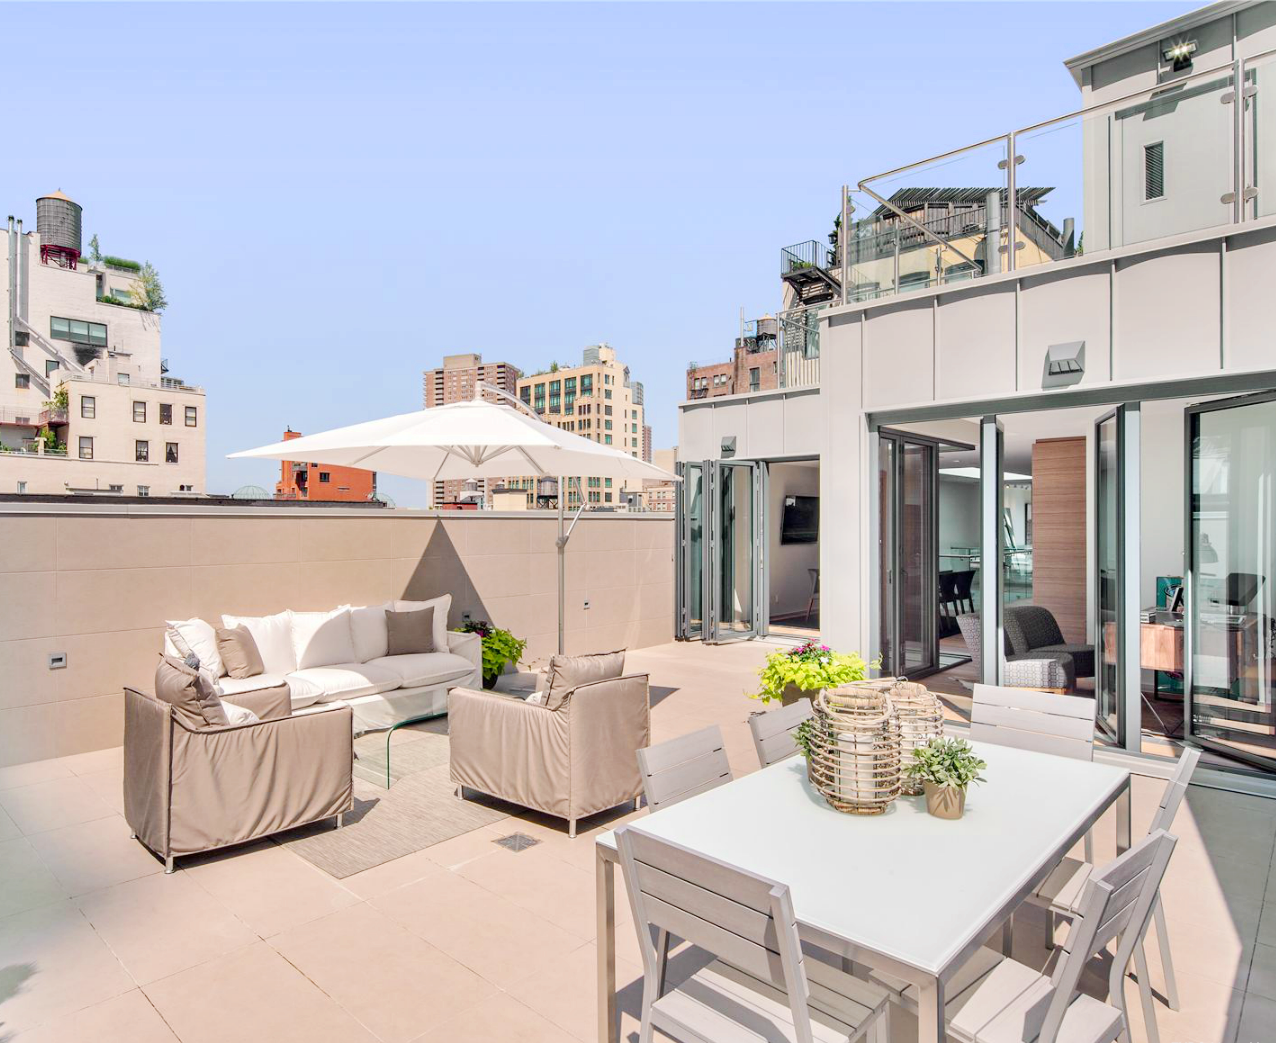 Outdoor dining area and lounge in a NYC penthouse